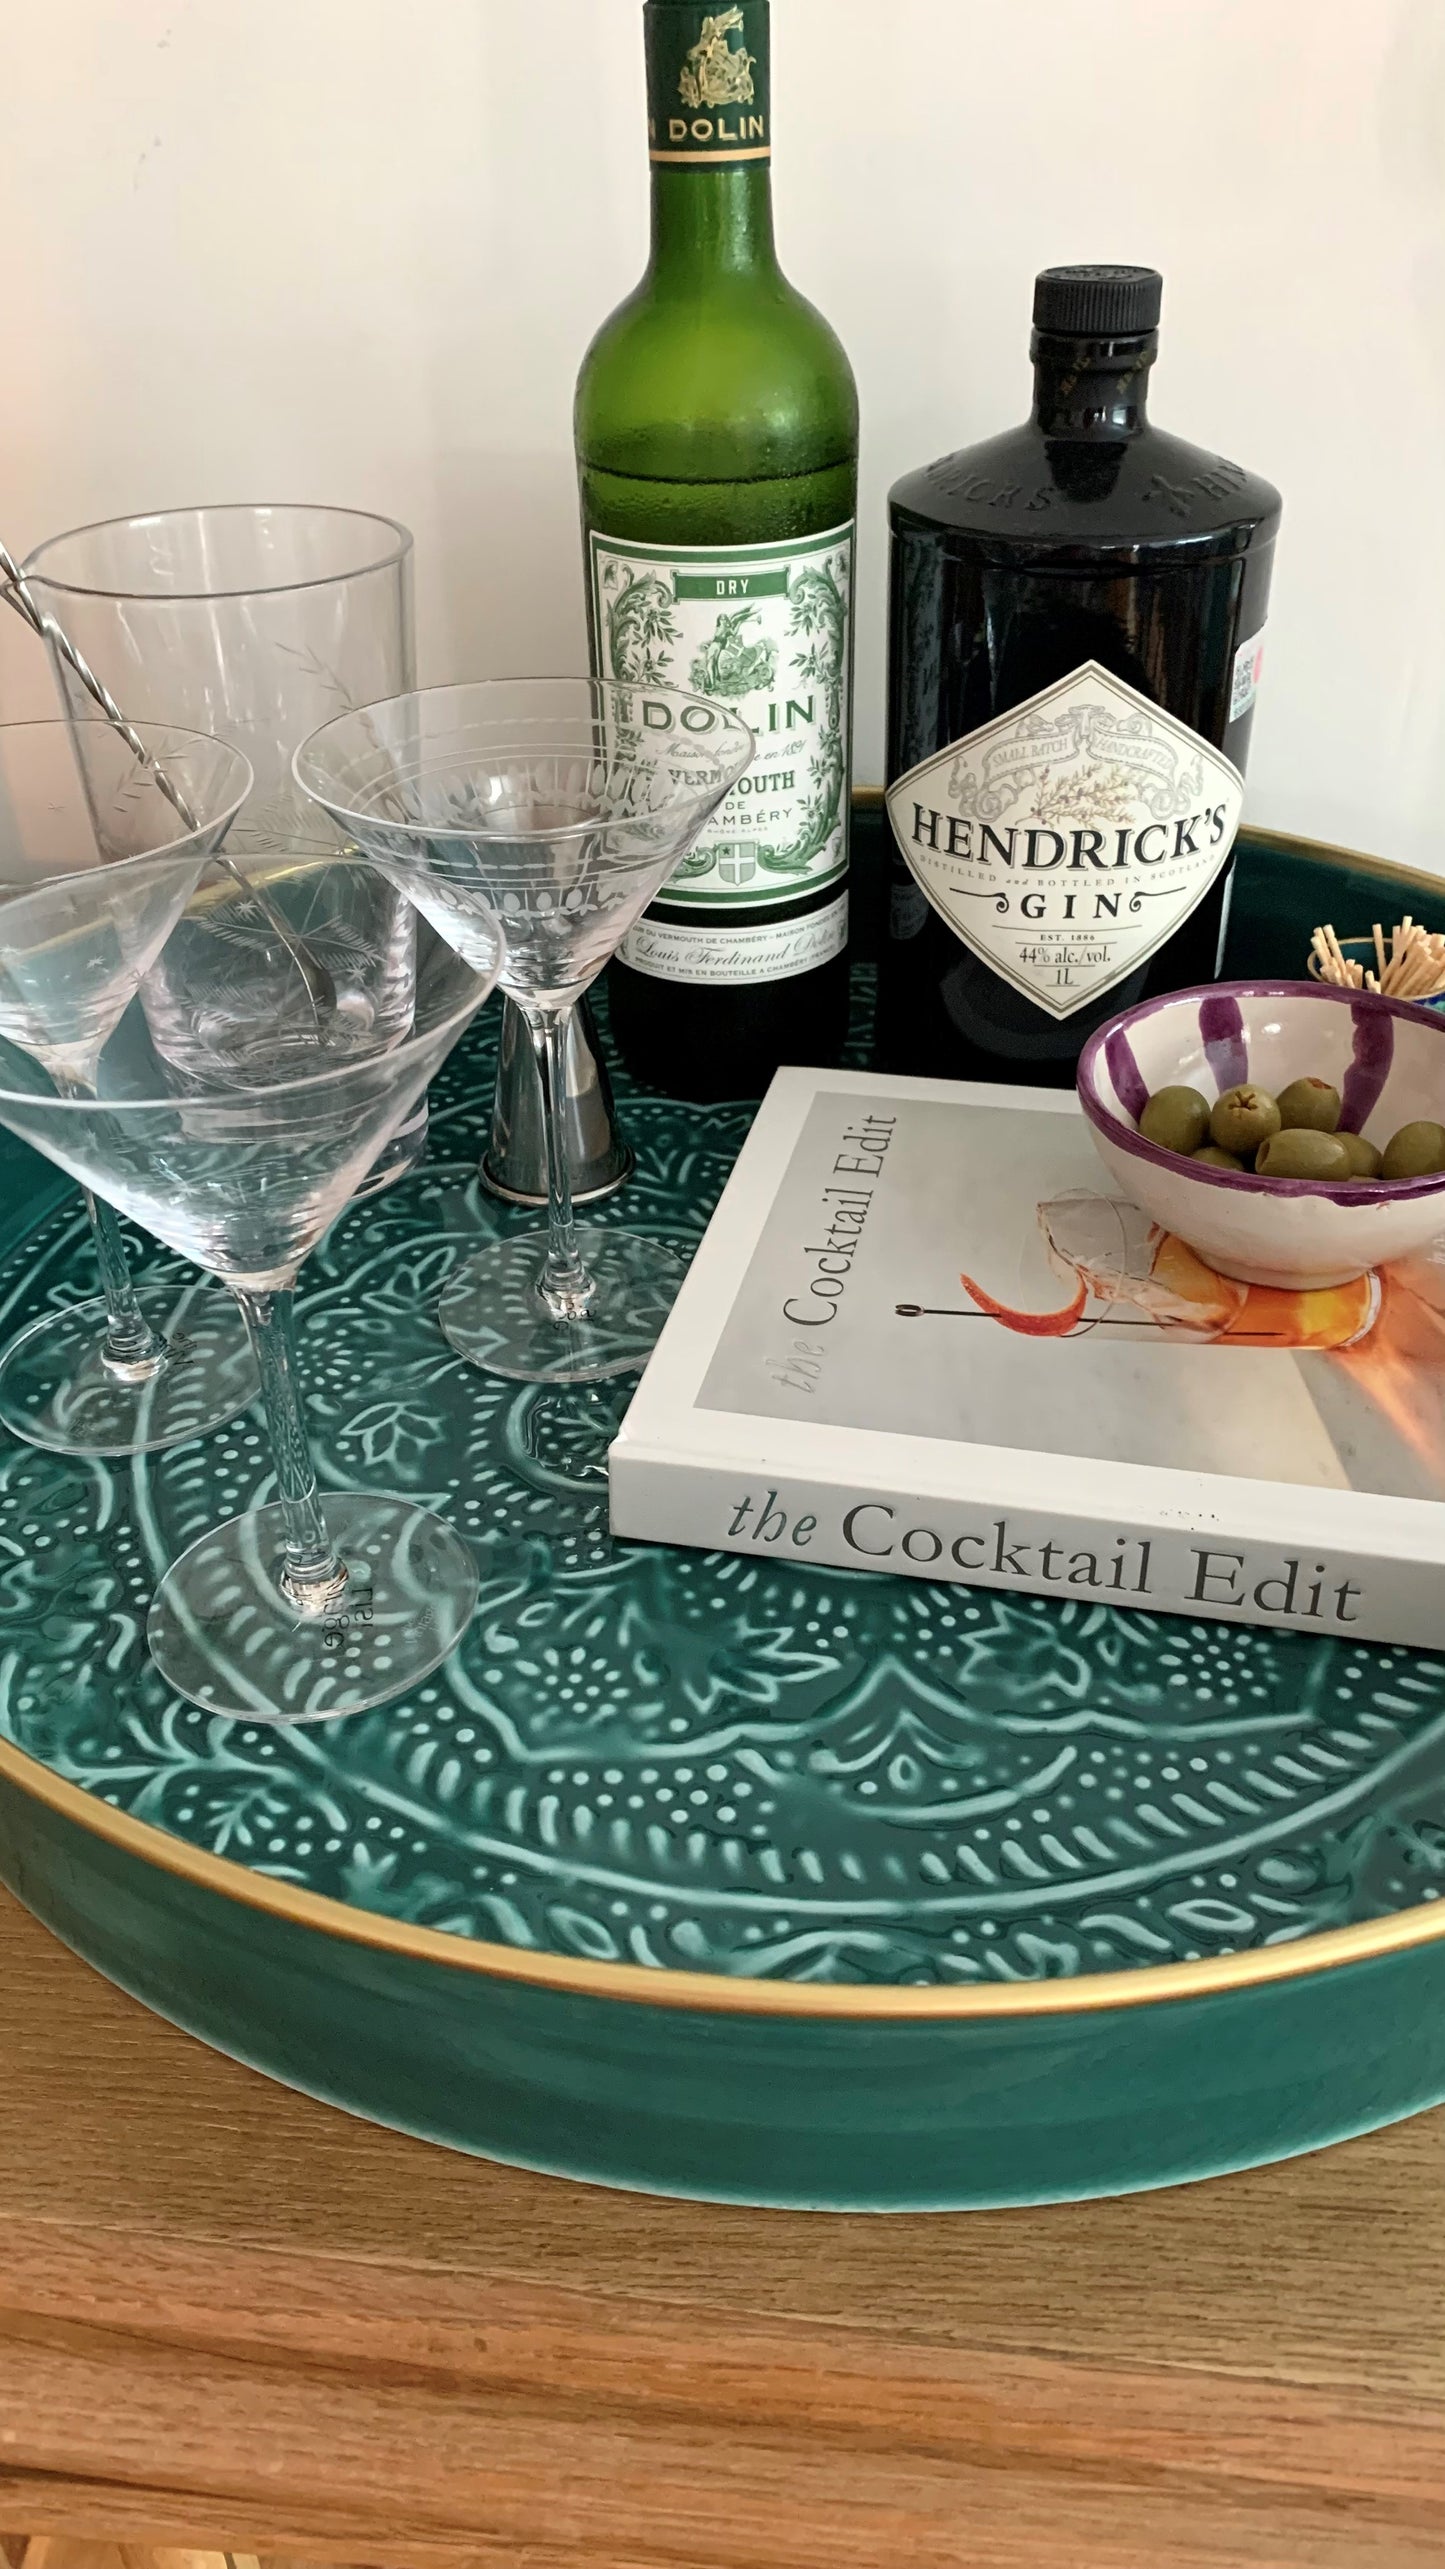 A teal coloured enamel drinks tray with a cocktail book, martini glasses and some spirits.